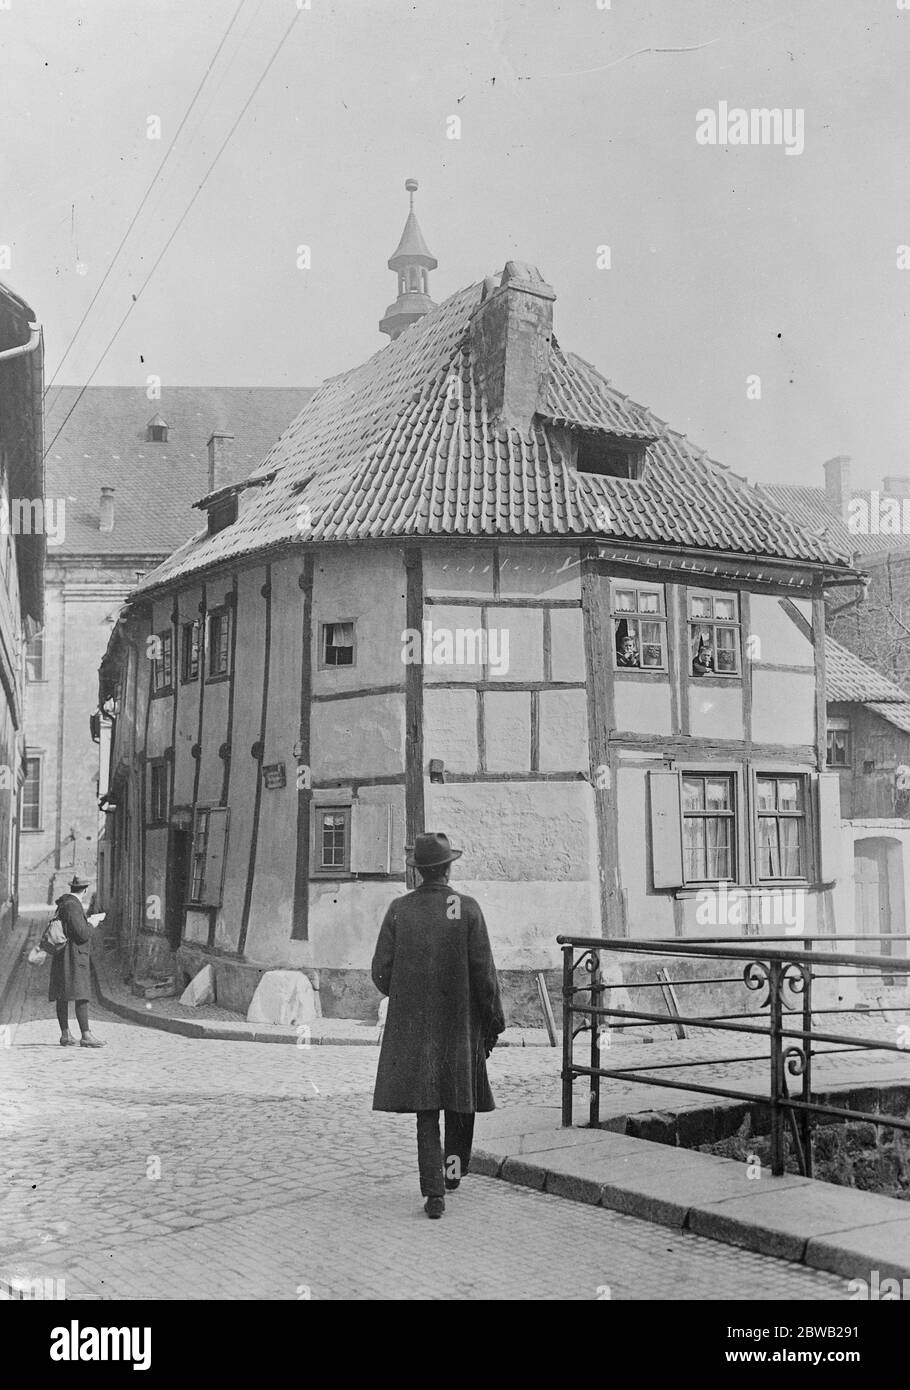 Town celebrates its thousandth year of existence The oldest house in the town of Quedlinburg ( Prussian Saxony ) which has just celebrated its thousand year jubilee 29 April 1922 Stock Photo